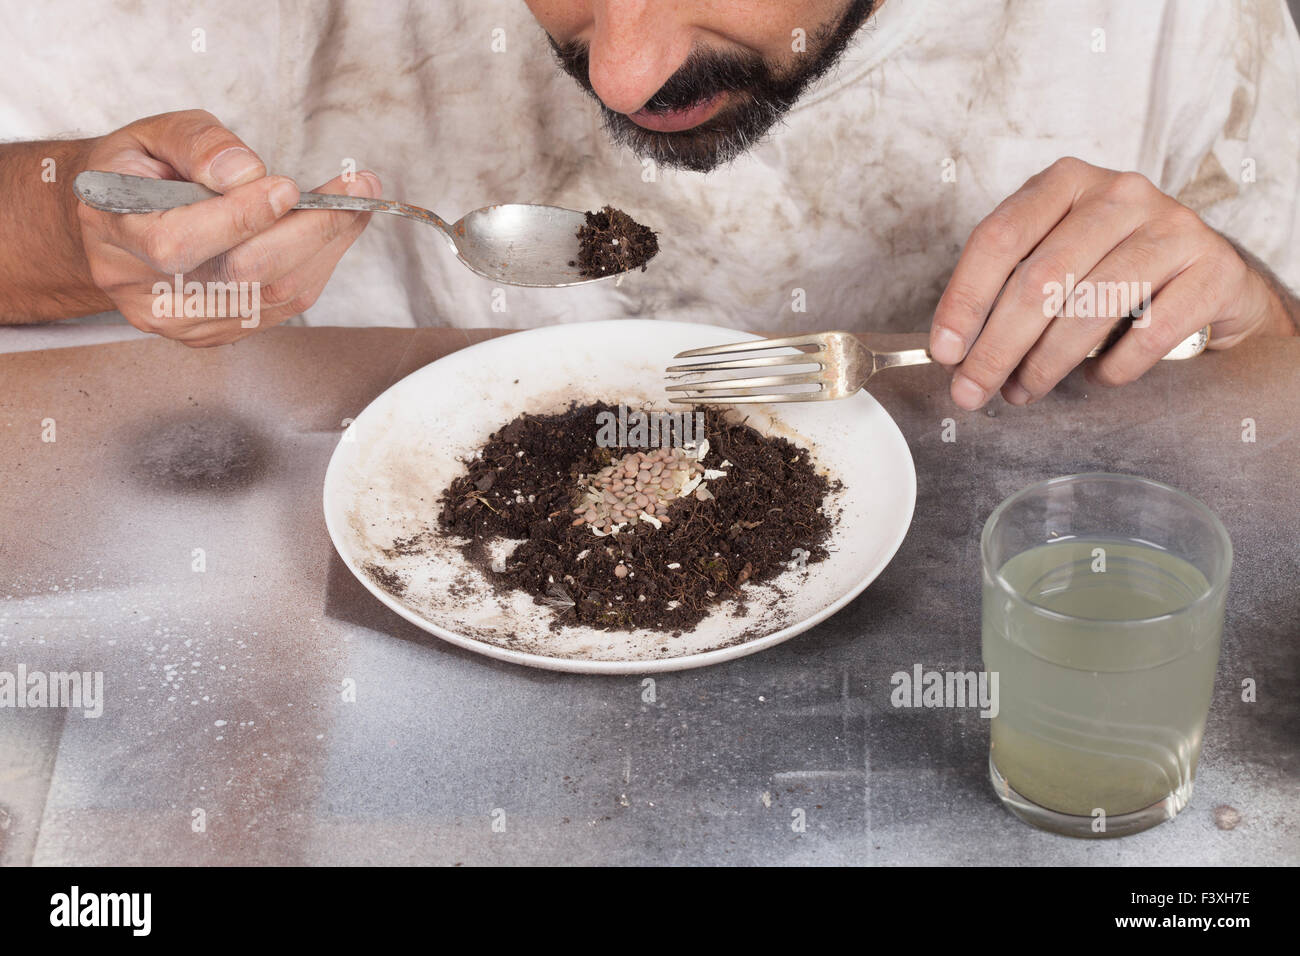 concept of bad food of a person without economic resources Stock Photo